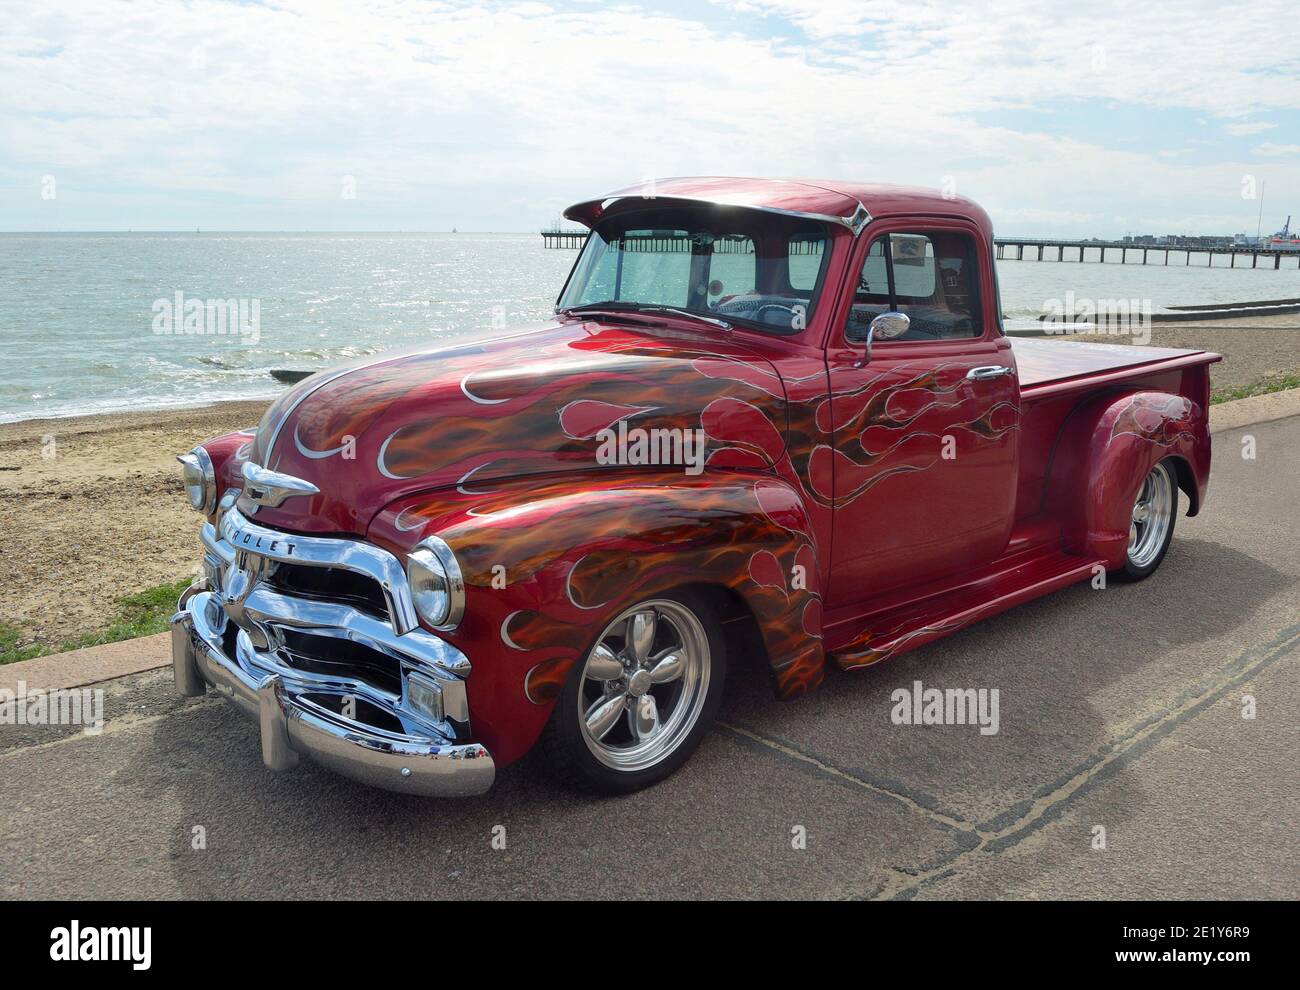 Classic red Chevrolet pickup truck on Felixstowe seafront. Stock Photo